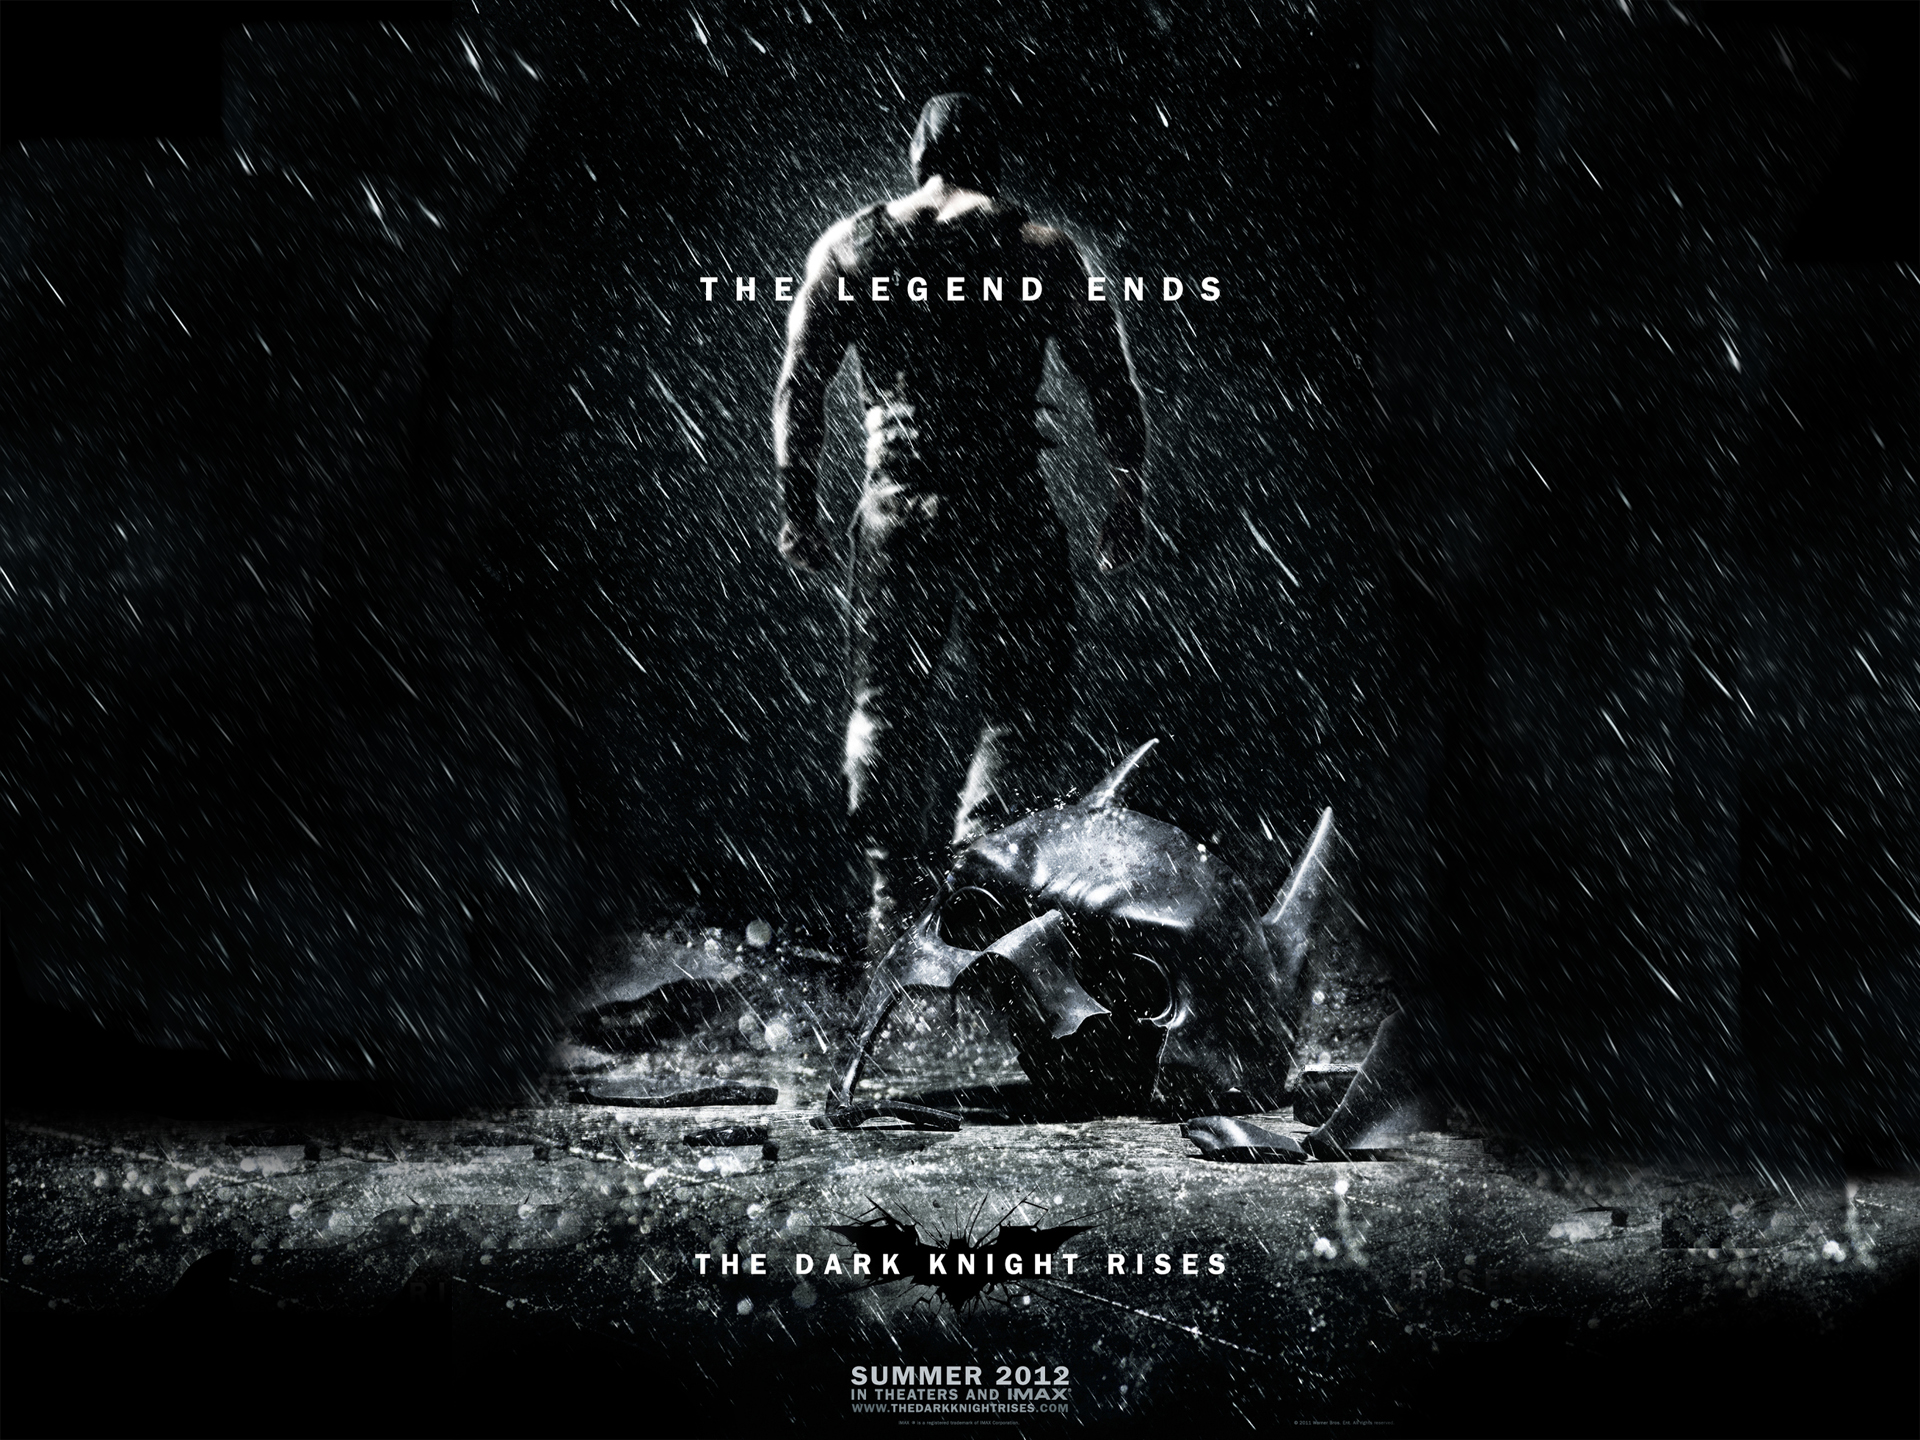 The Dark Knight Rises Two Exclusive wallpapers and the new poster 1920x1440